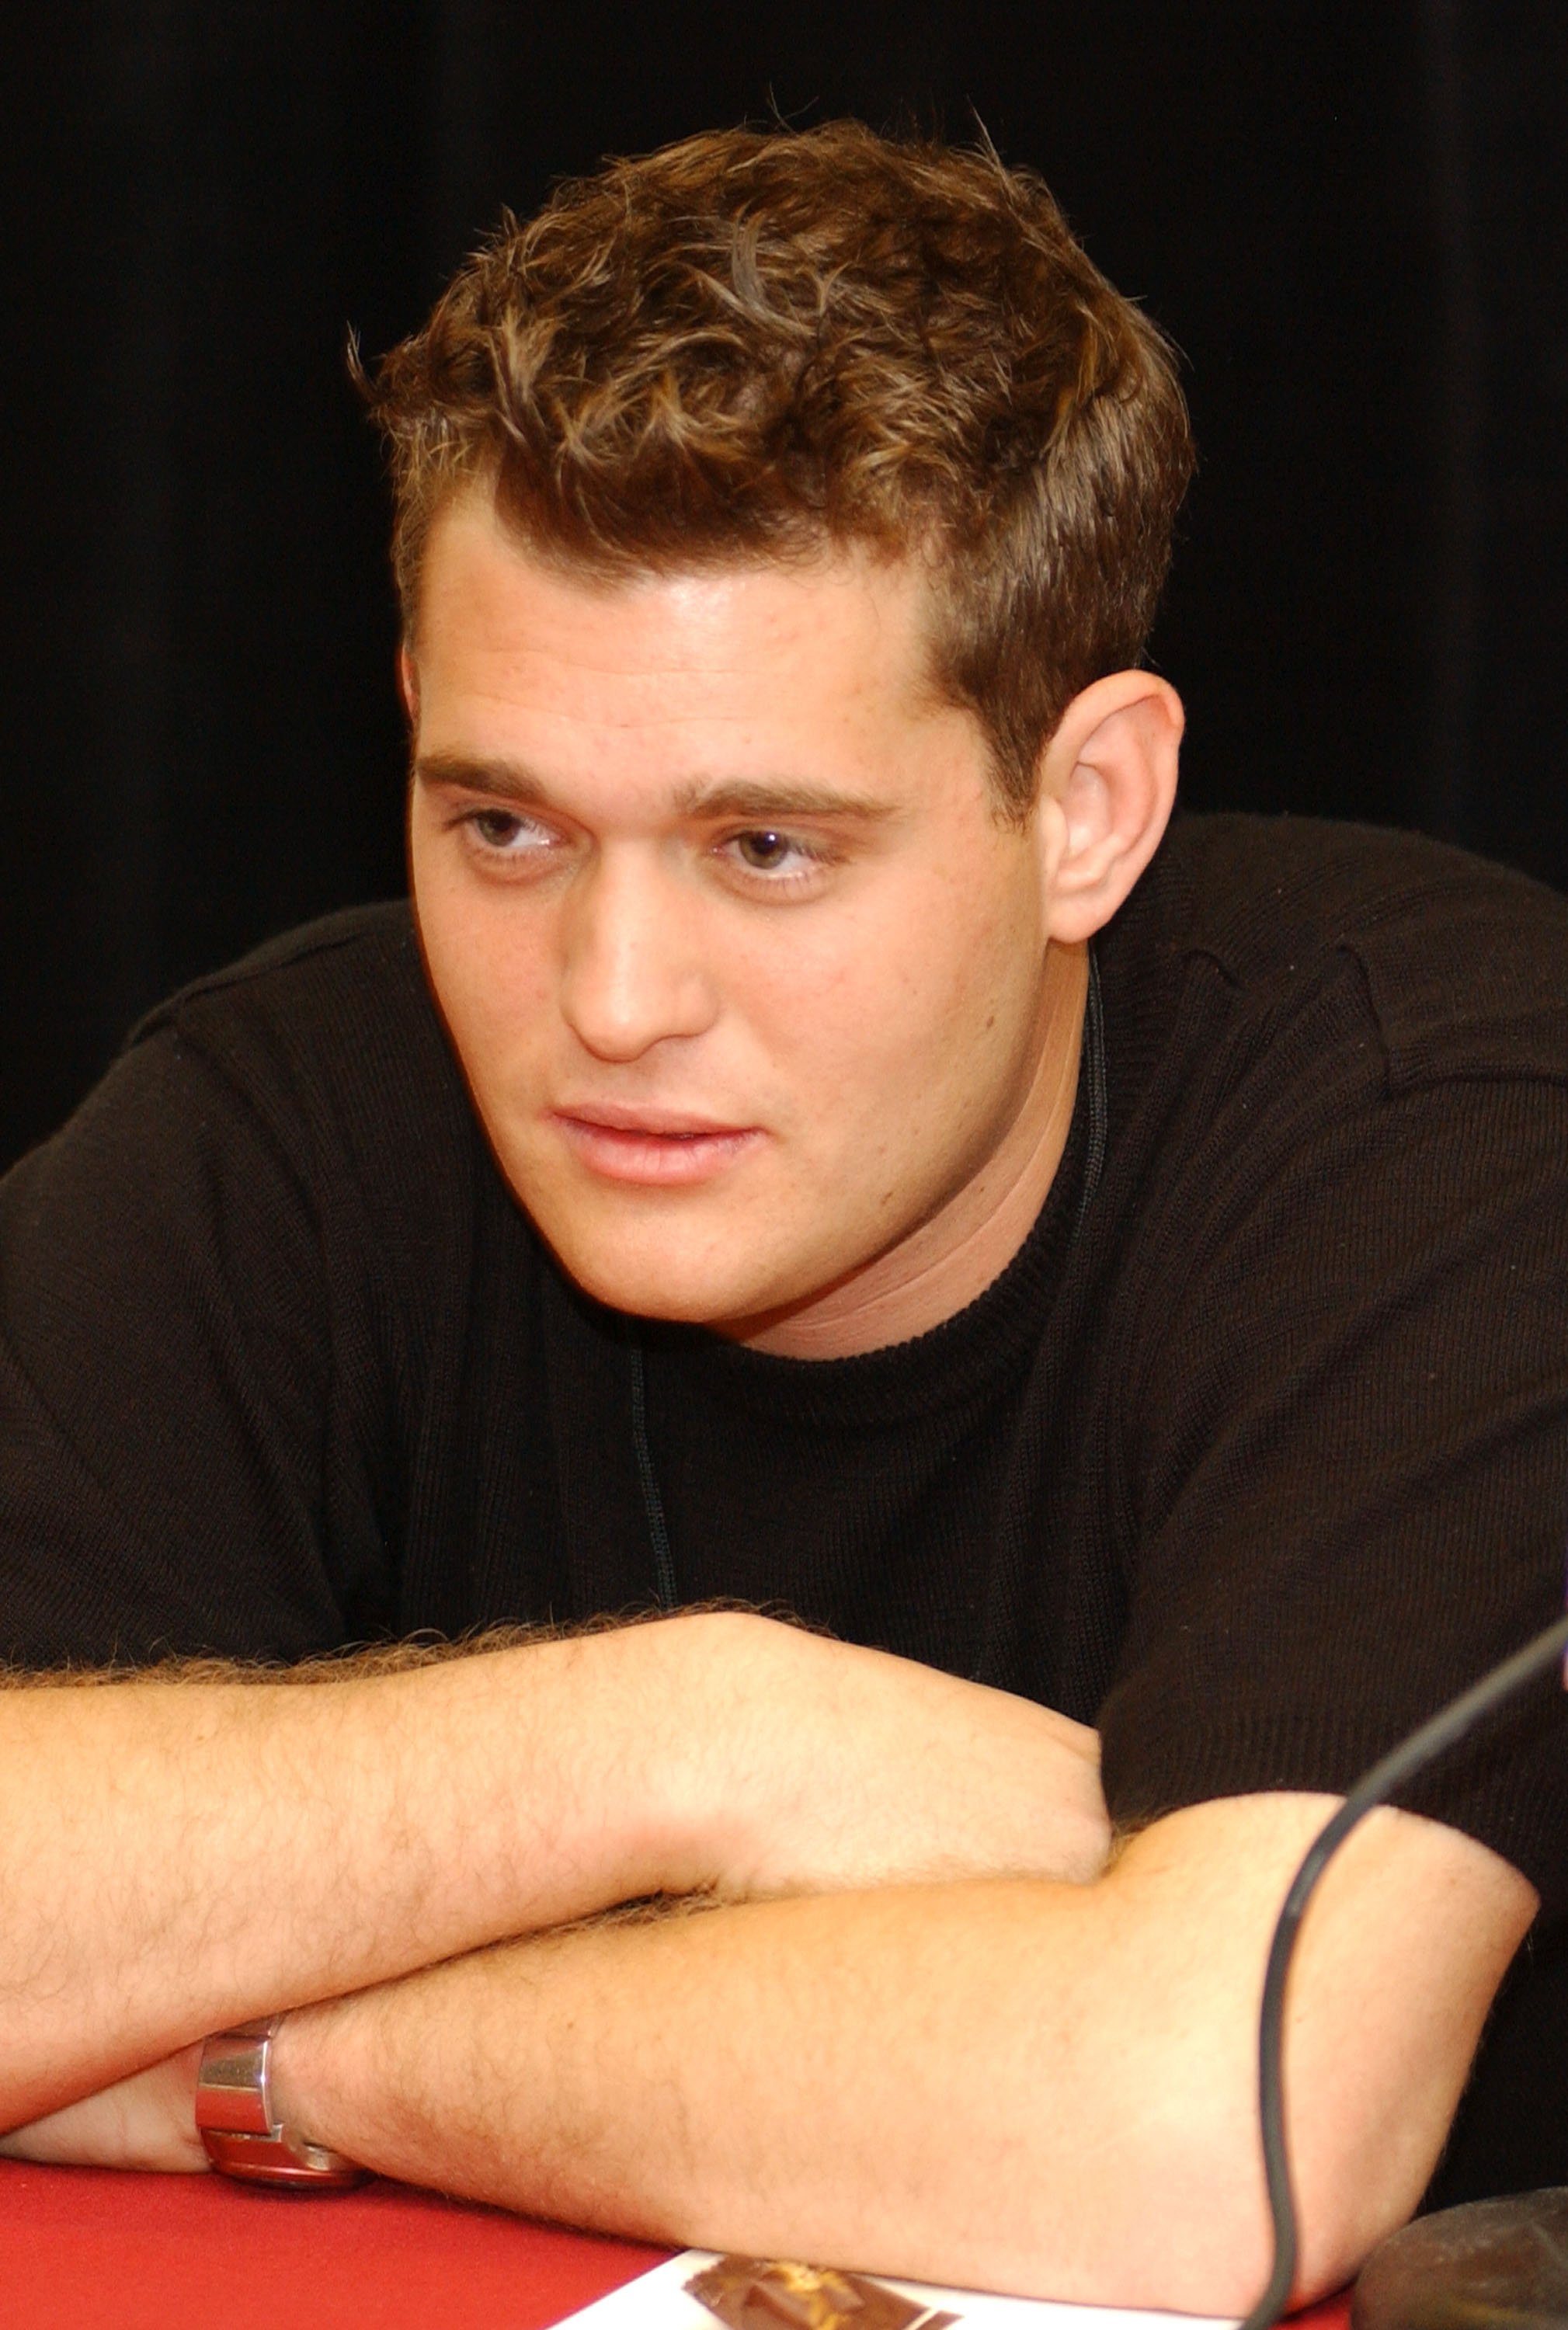 Michael Bublé at The Andre Agassi Charitable Foundation's 7th Grand Slam for Children Fundraiser - Press Conference in Las Vegas, Nevada, on September 28, 2002. | Source: Denise Truscello/WireImage/Getty Images